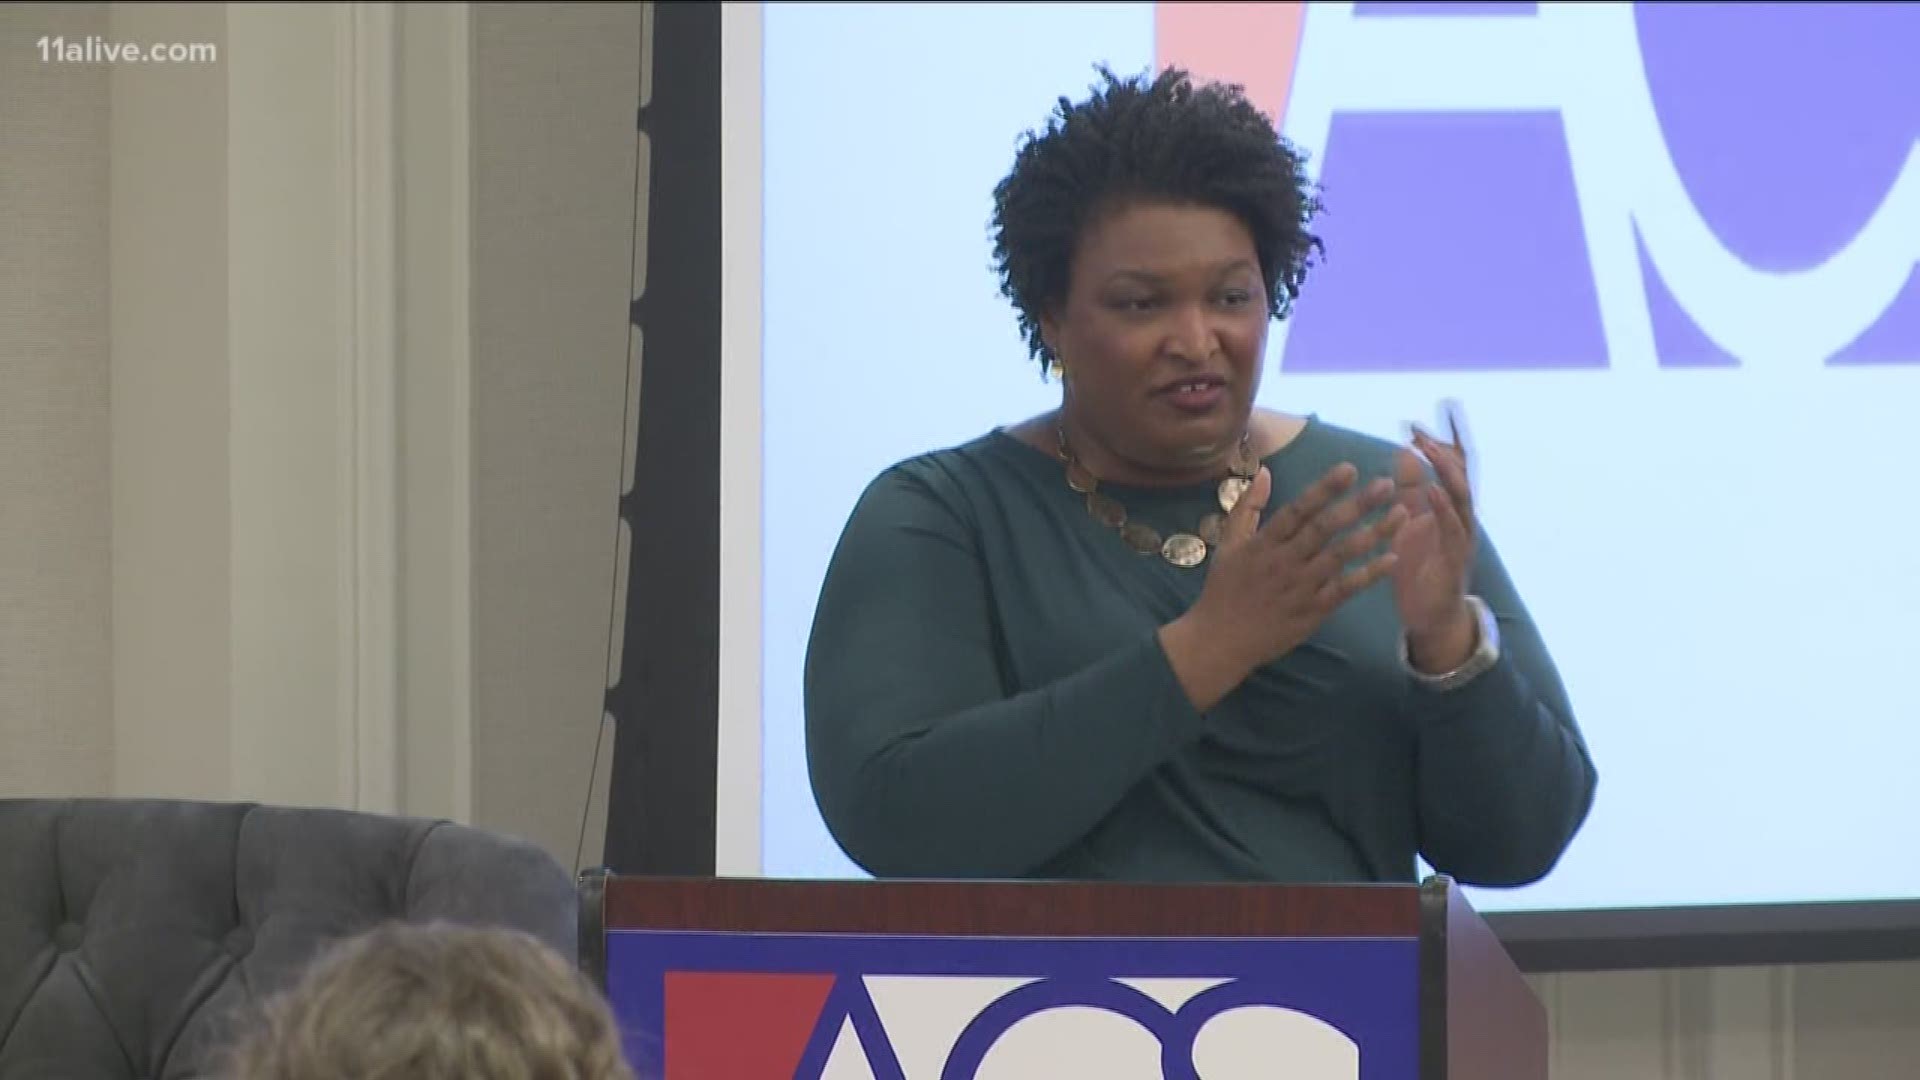 During her first public appearance  after giving the Democratic response  to the State of the Union address, Abrams received a Legal Legend award/